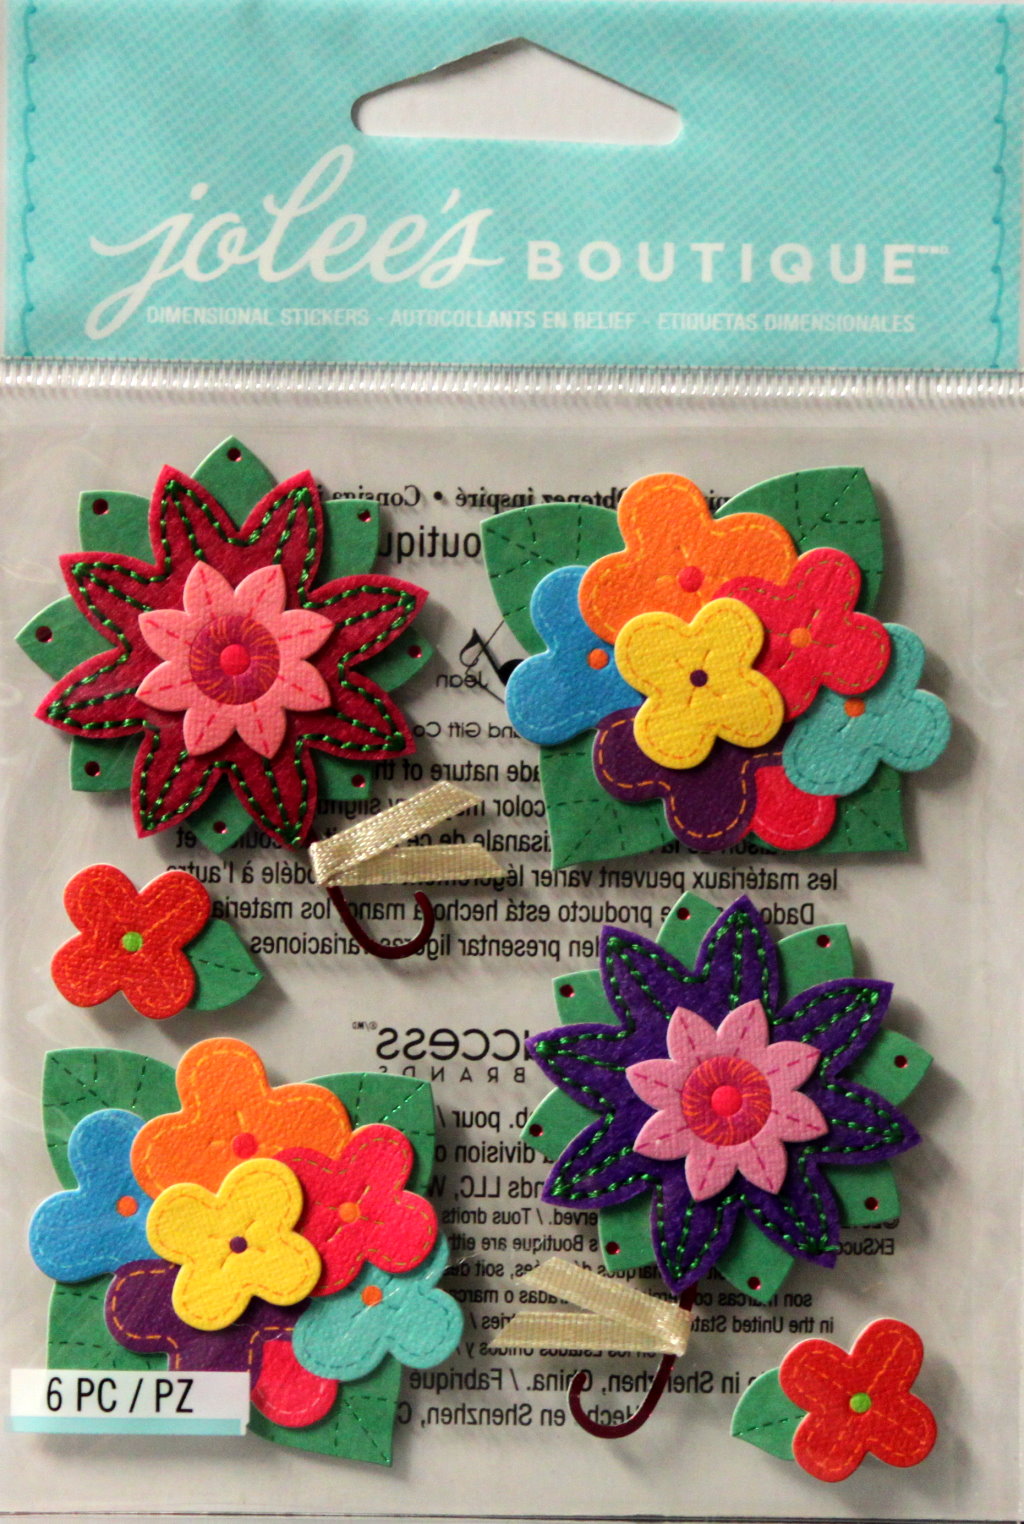 Jolee's Boutique Colorful Stitched Flowers Stickers